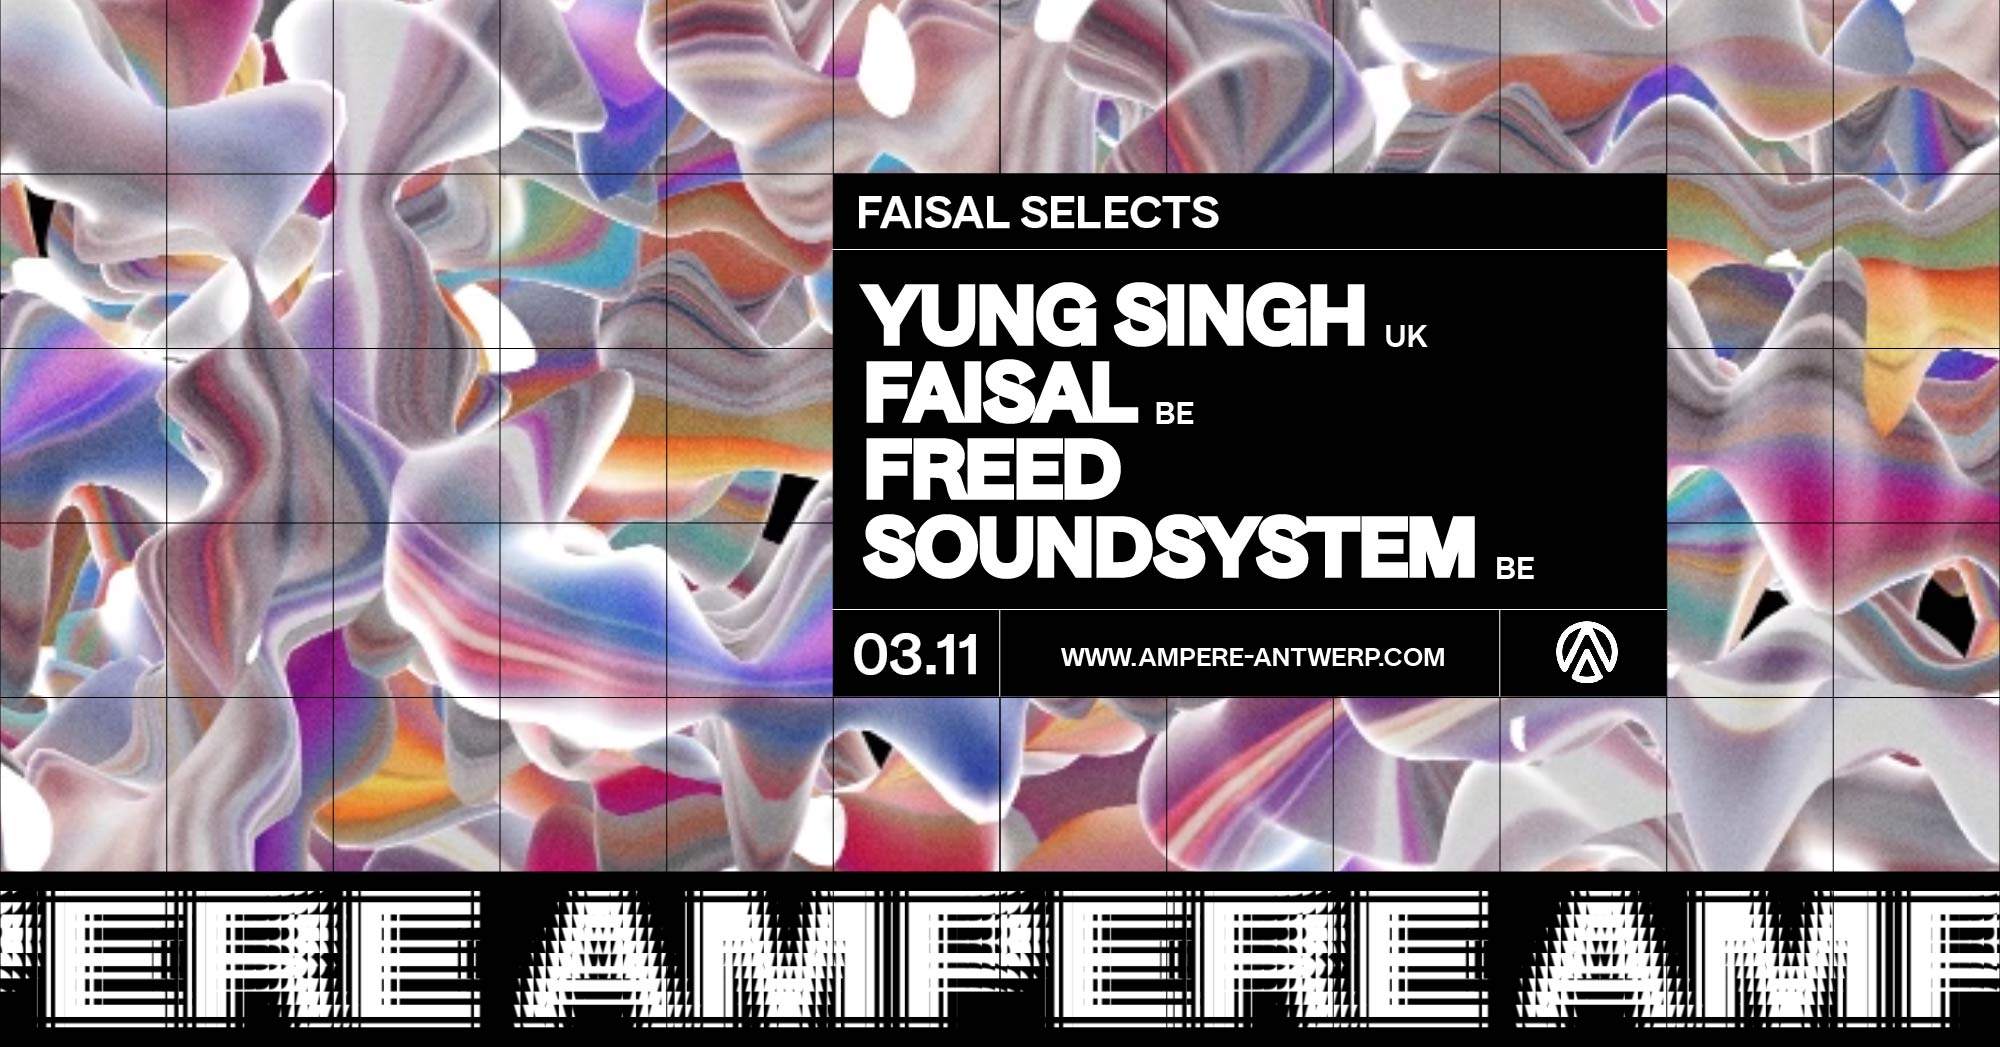 Faisal Selects with Yung Singh (UK) - Freed Soundsystem - Faisal - Página frontal